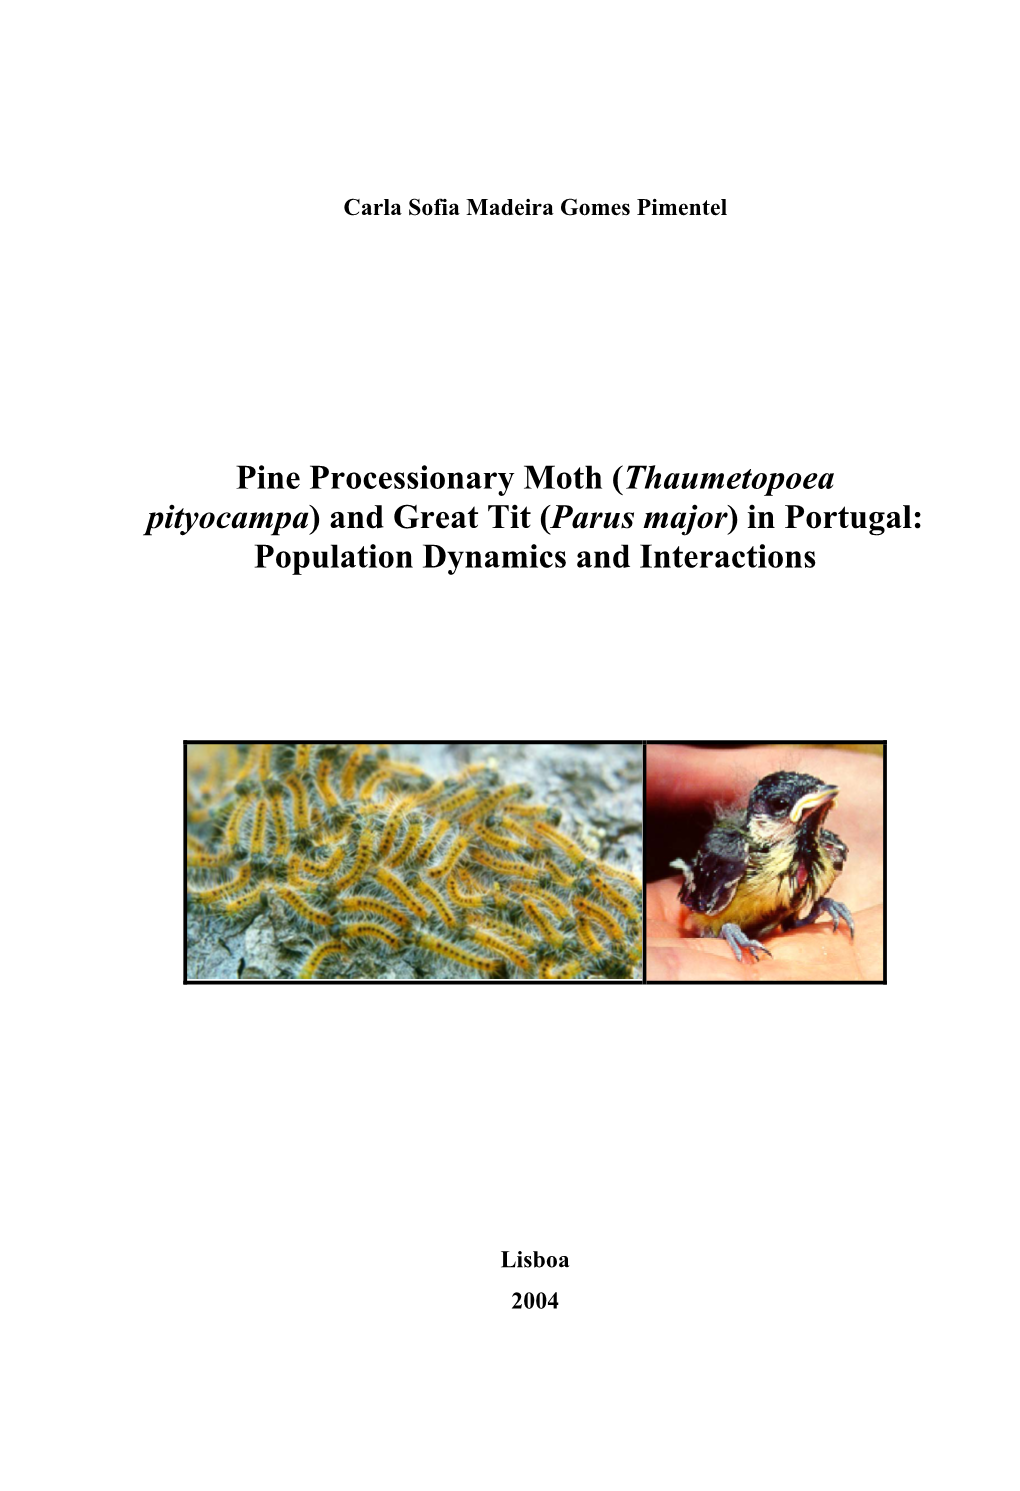 Pine Processionary Moth (Thaumetopoea Pityocampa) and Great Tit (Parus Major) in Portugal: Population Dynamics and Interactions